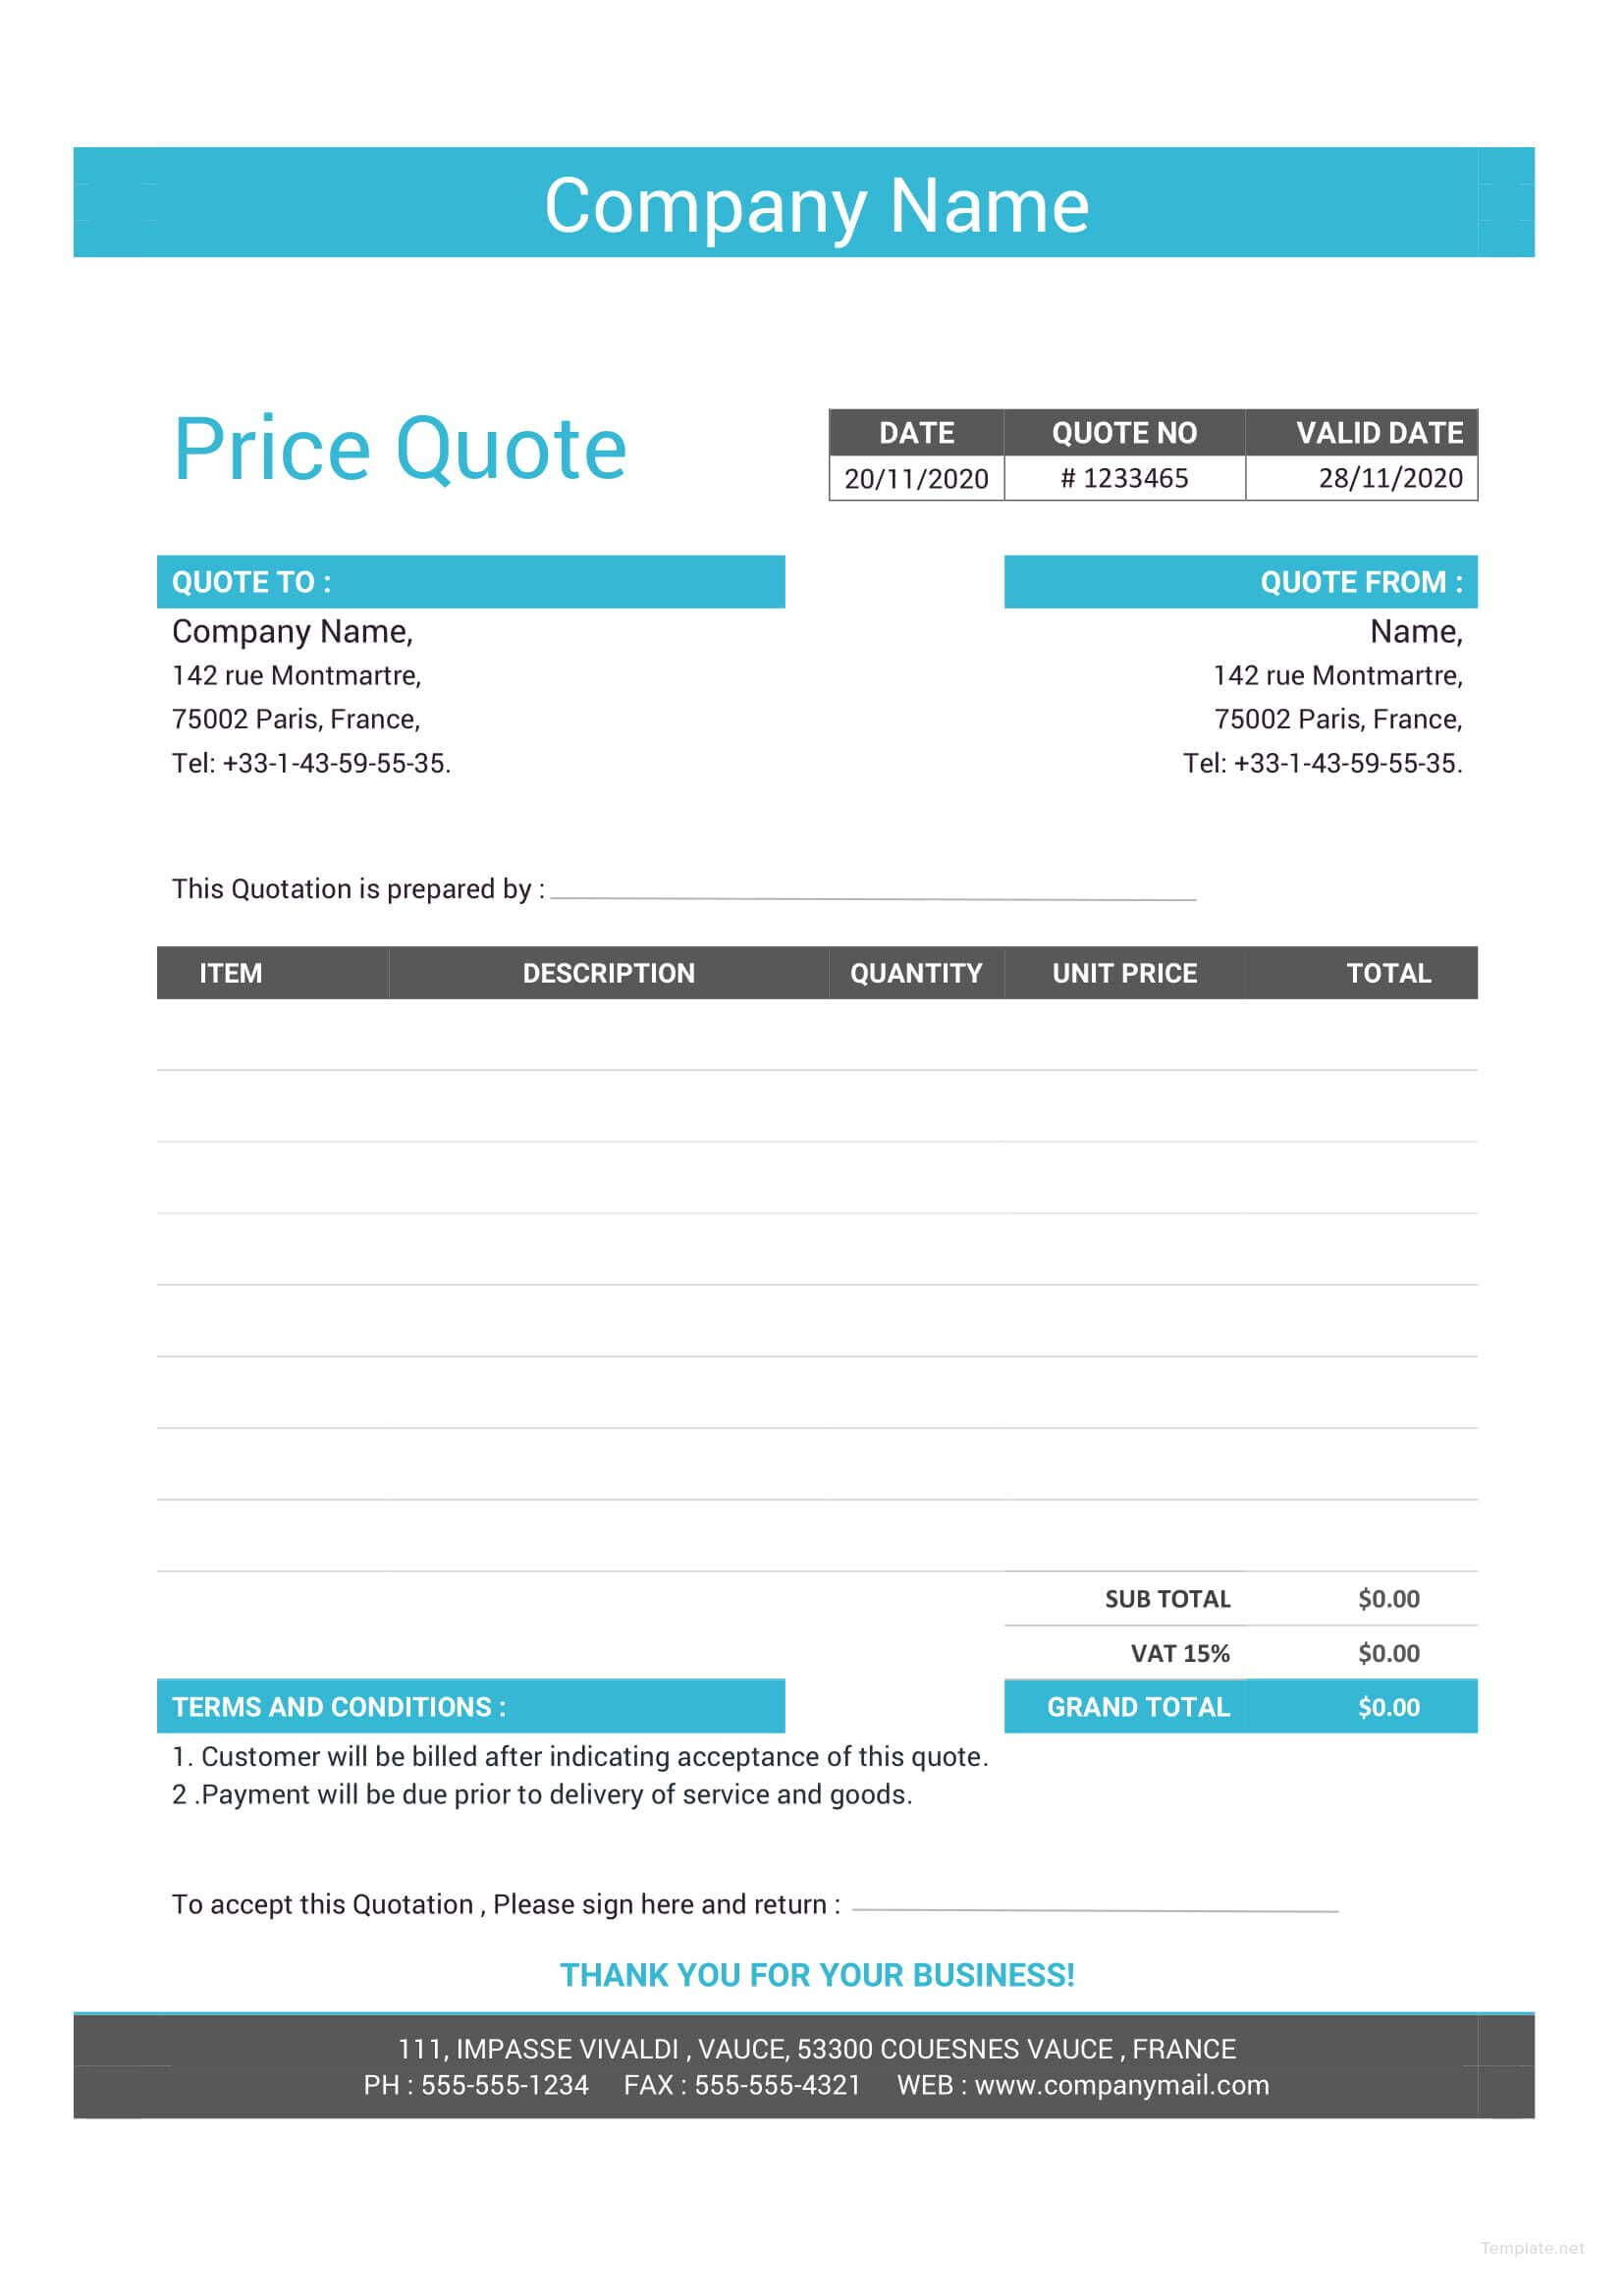 Free Business Quotation Format Quotation Format, Quote With Web